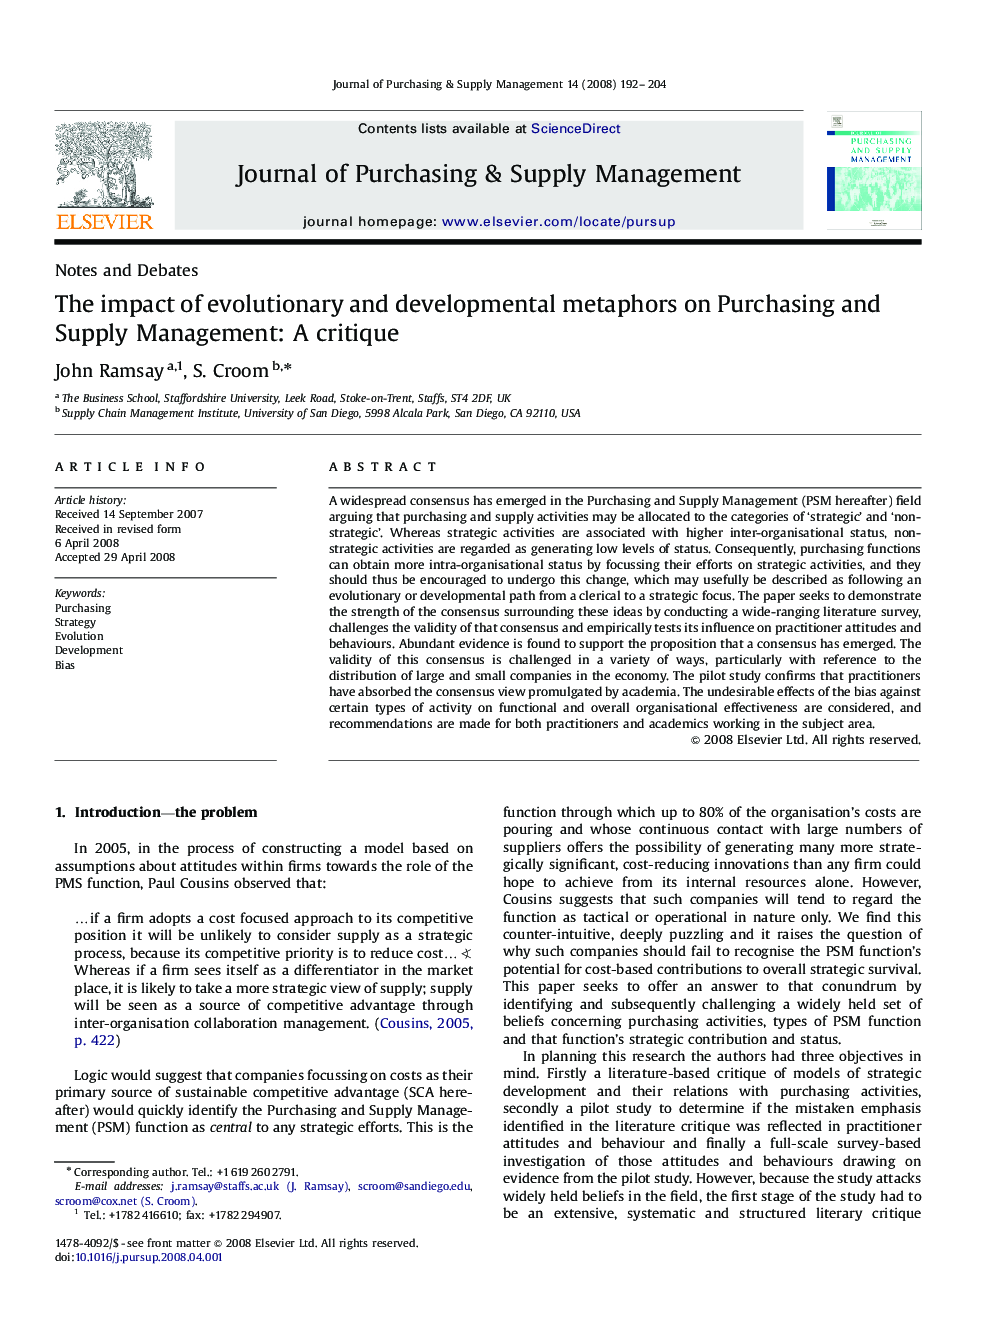 The impact of evolutionary and developmental metaphors on Purchasing and Supply Management: A critique